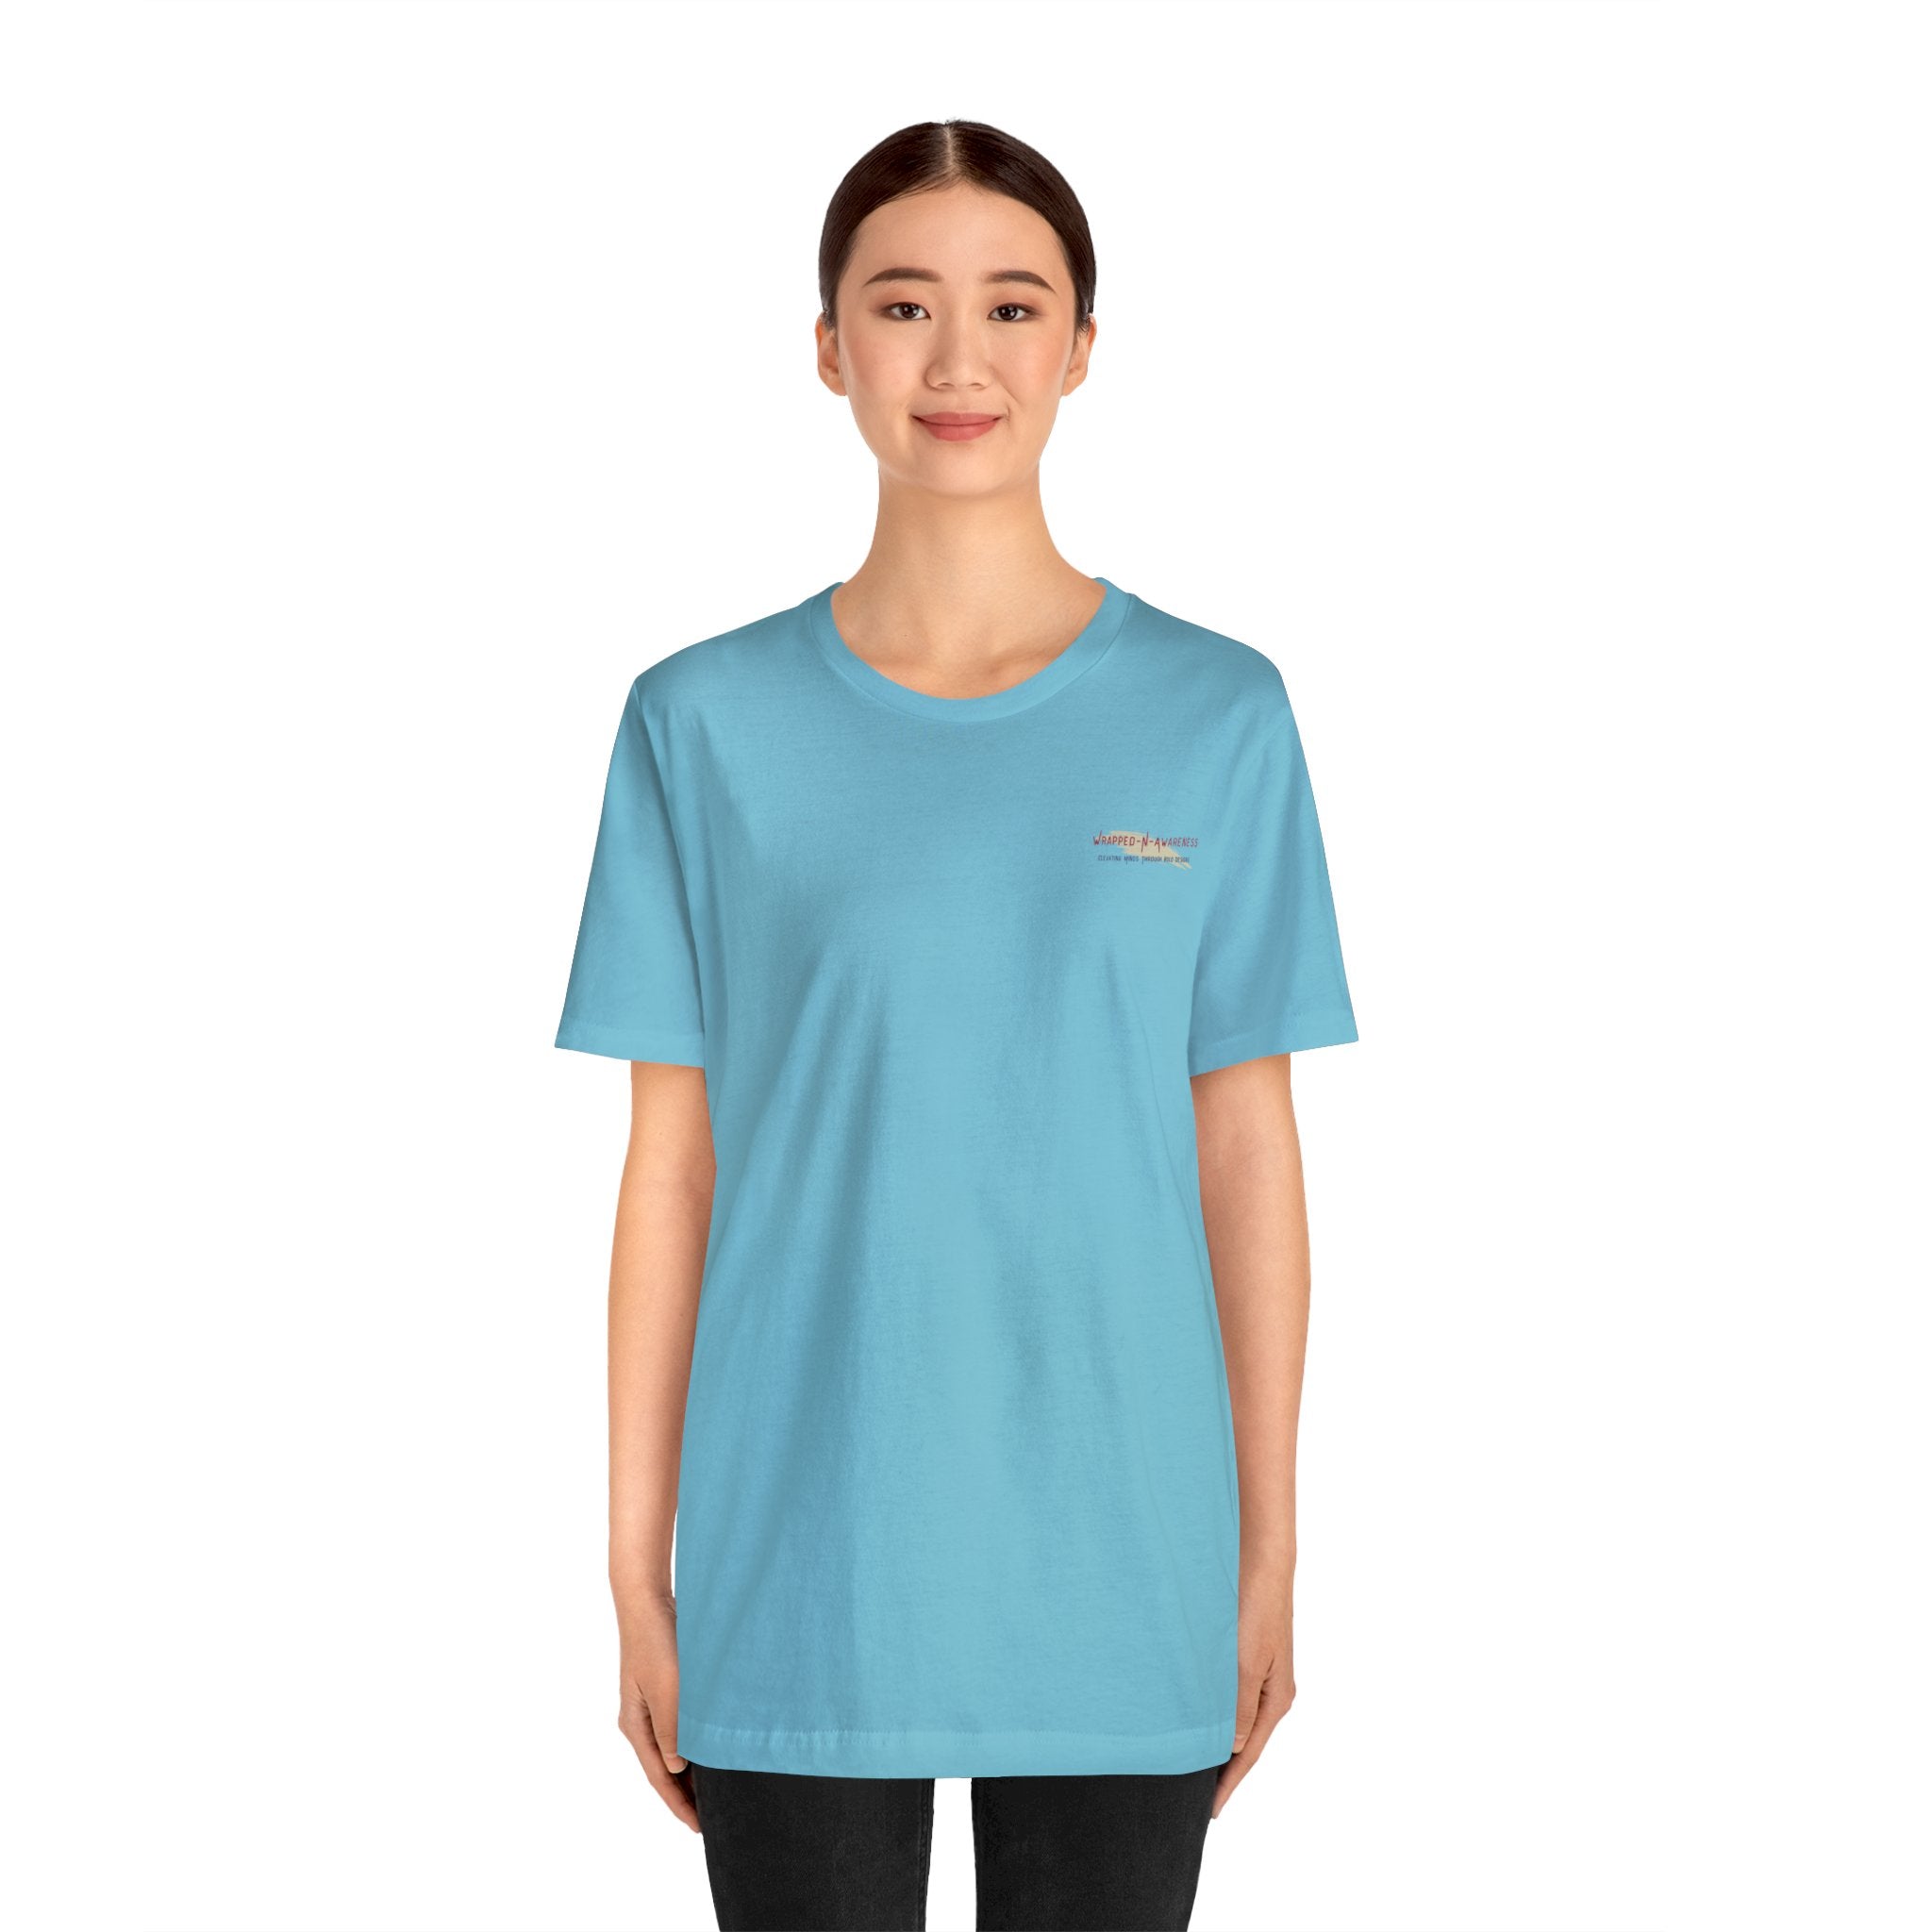 Find Your Balance Jersey Tee - Bella+Canvas 3001 Heather Mauve Airlume Cotton Bella+Canvas 3001 Crew Neckline Jersey Short Sleeve Lightweight Fabric Mental Health Support Retail Fit Tear-away Label Tee Unisex Tee T-Shirt 12867474514364740429_2048 Printify